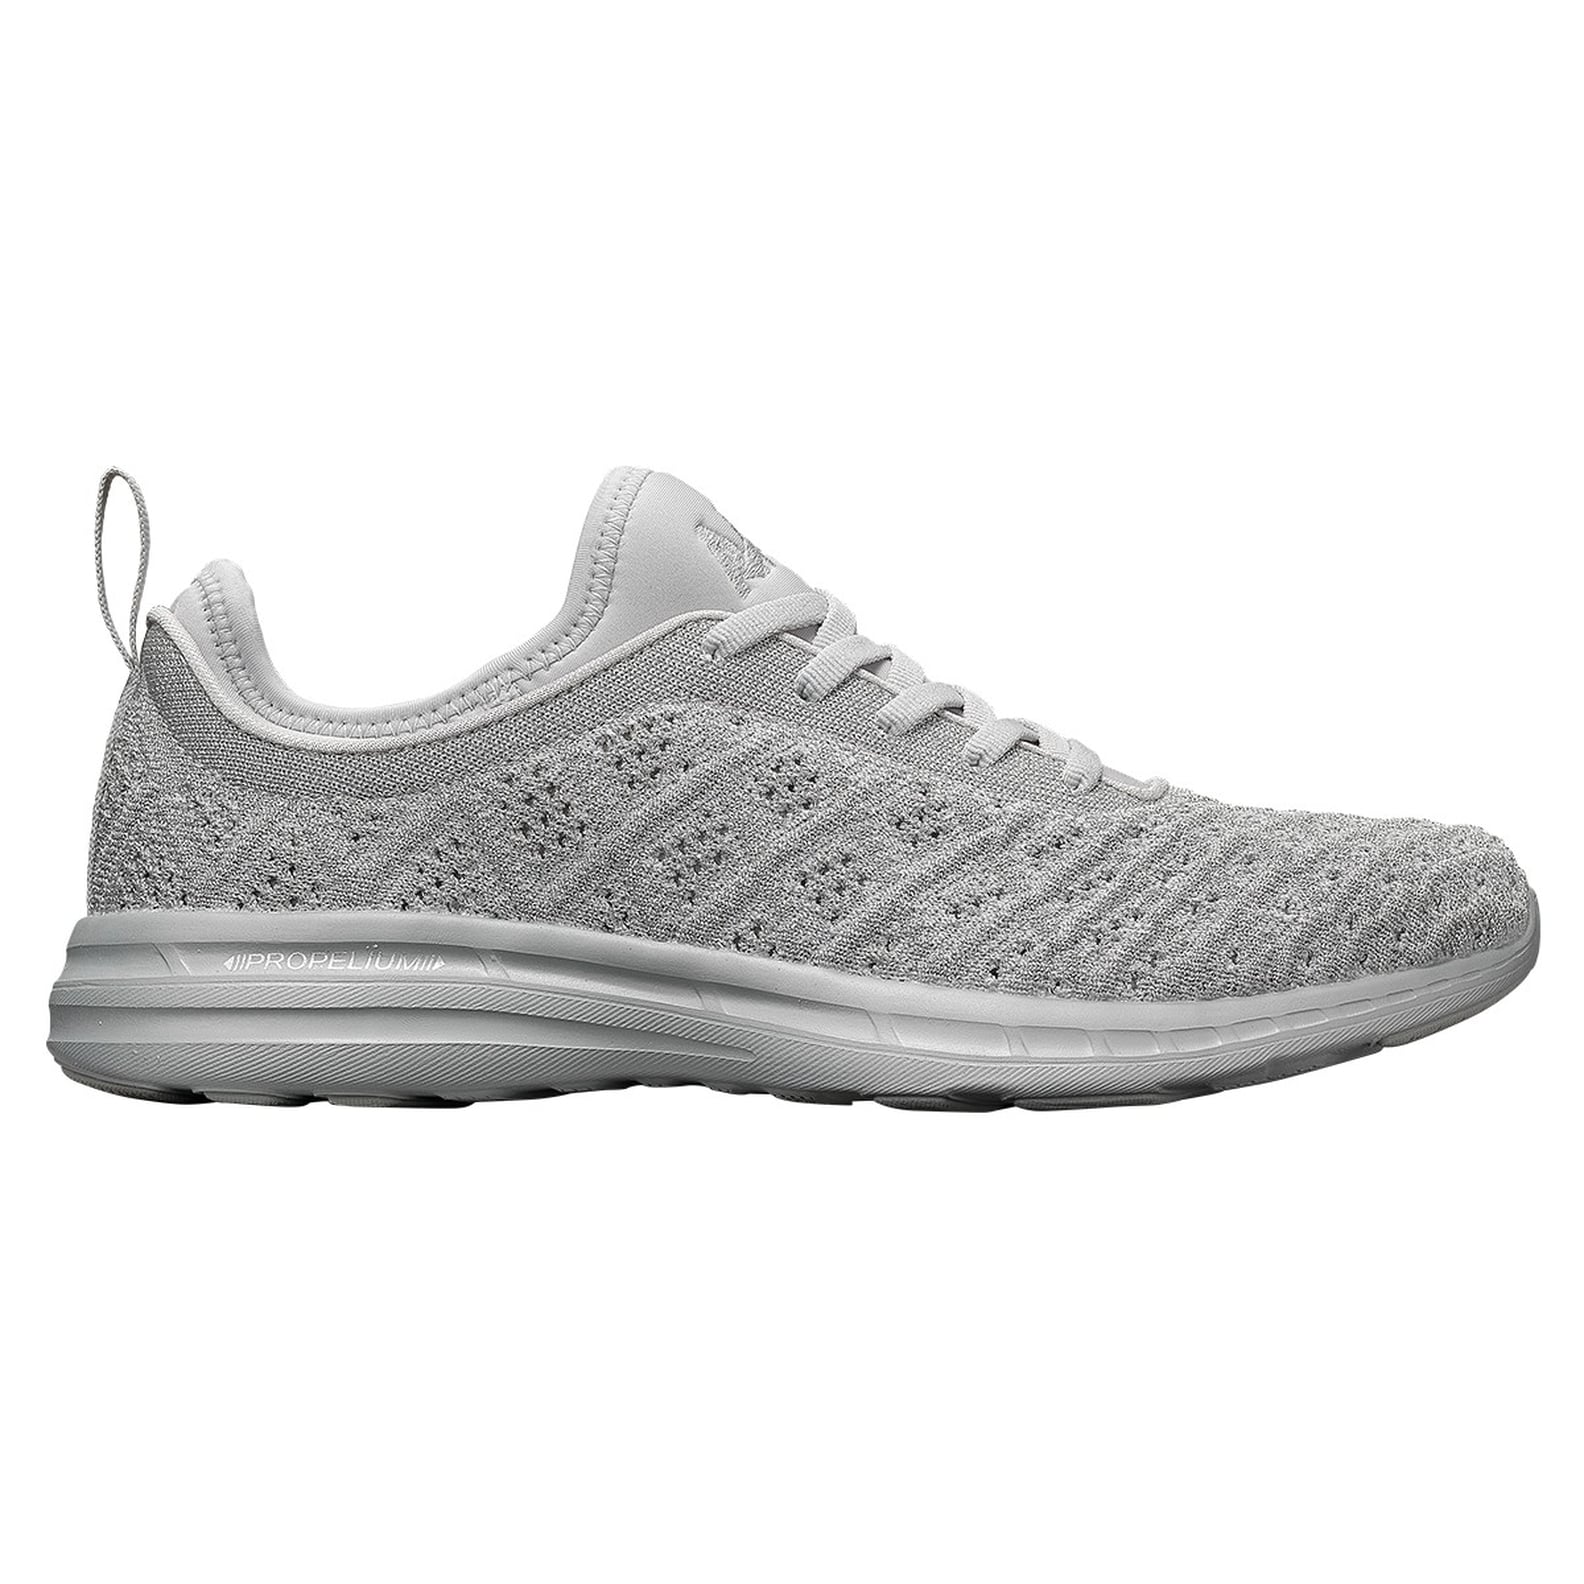 APL TechLoom Sneakers in Neutral Black, White, and Gray | POPSUGAR Fitness